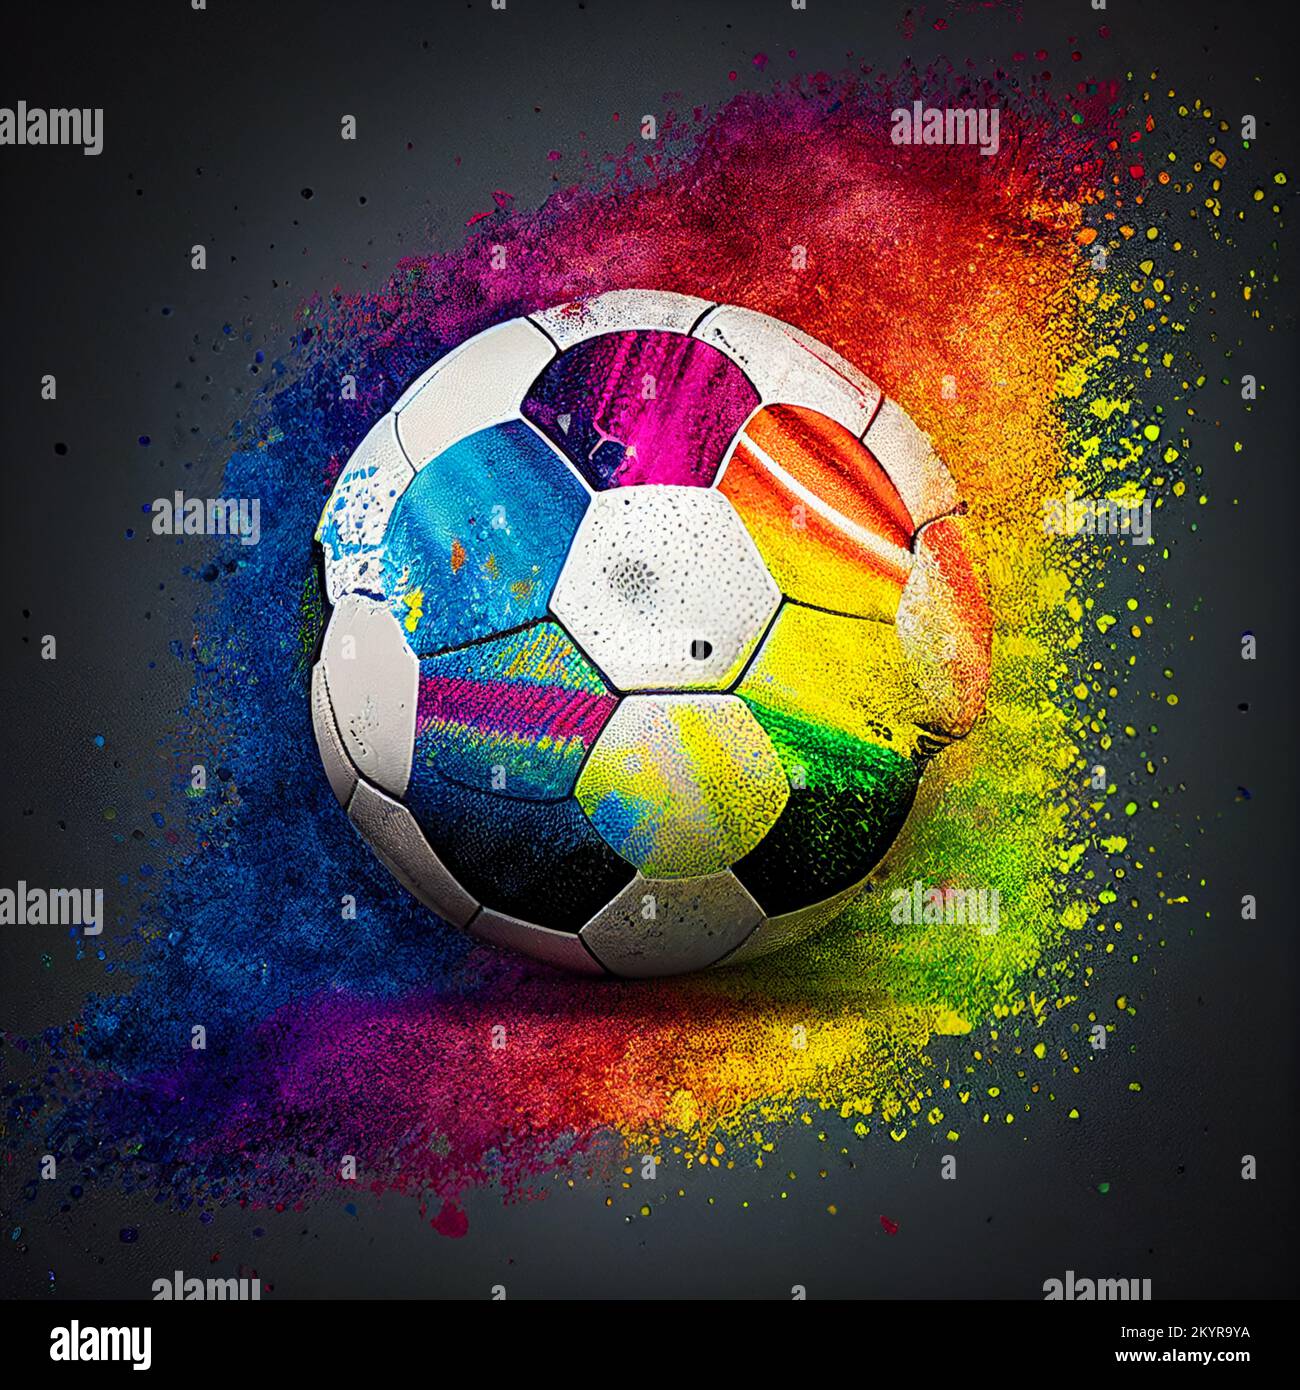 Football / Soccer illustration, celebrating the World Cup, rainbow colors Stock Photo